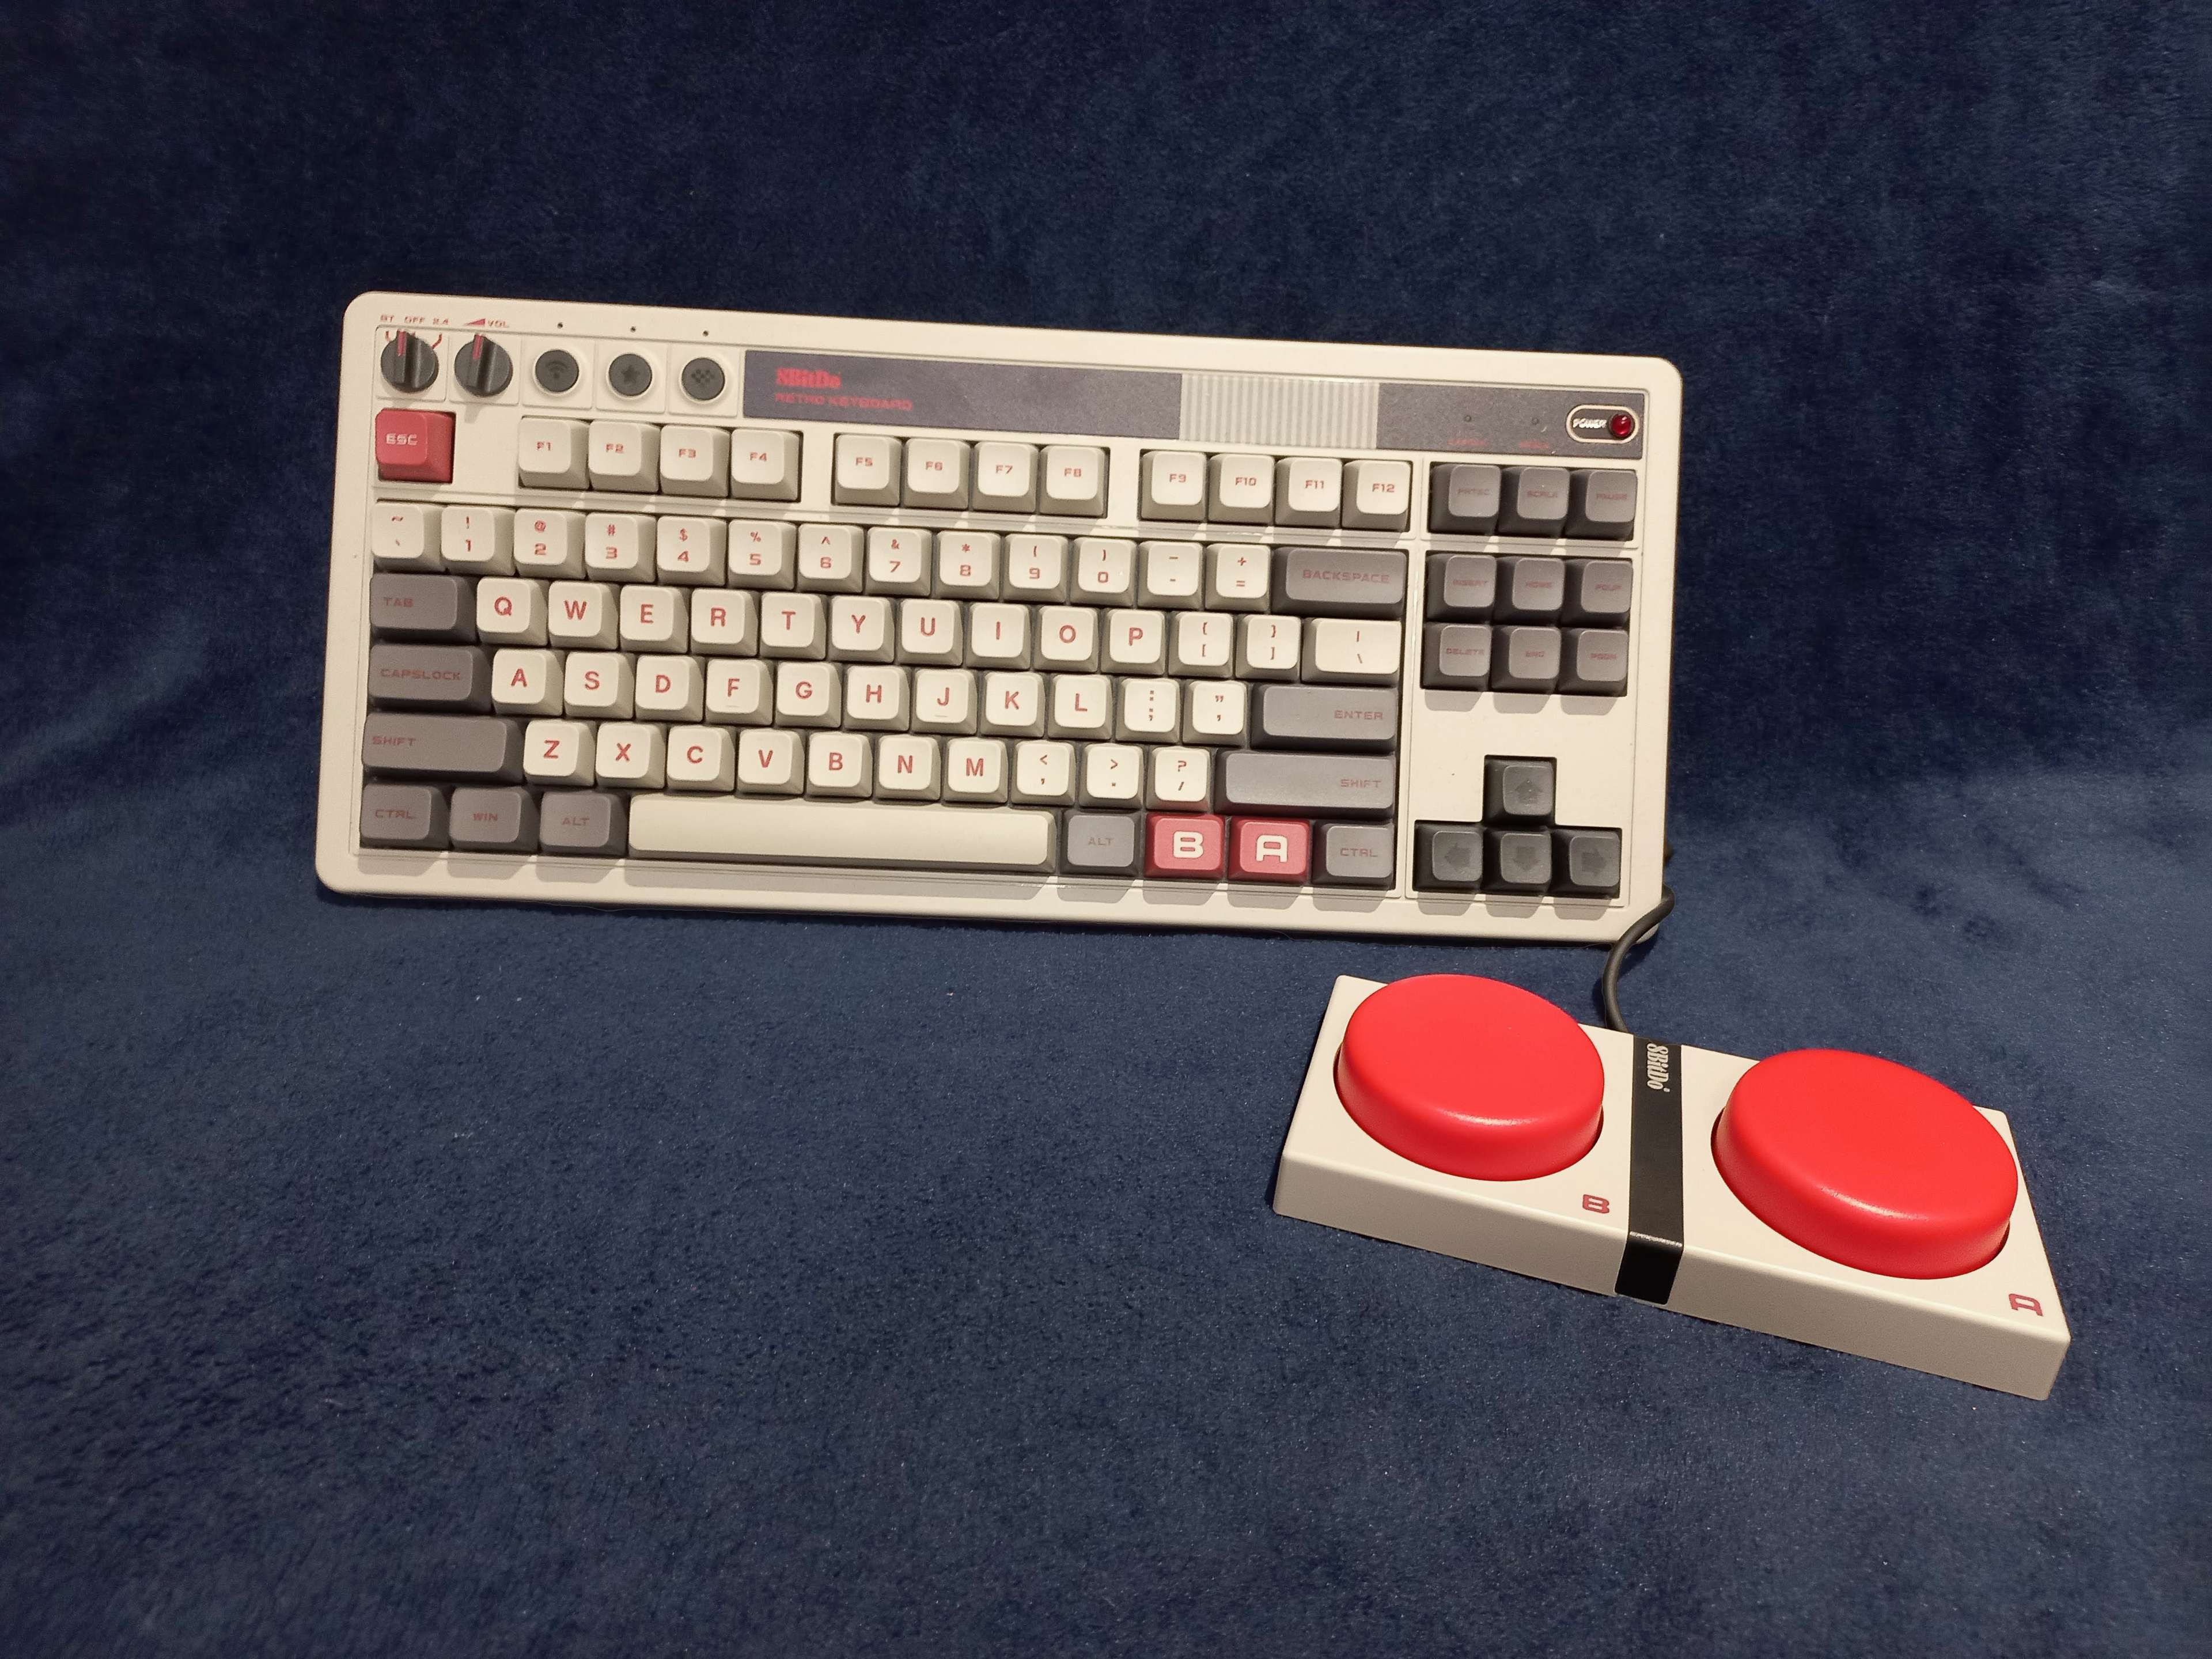 8BitDo retro mechanical keyboard with Super Buttons